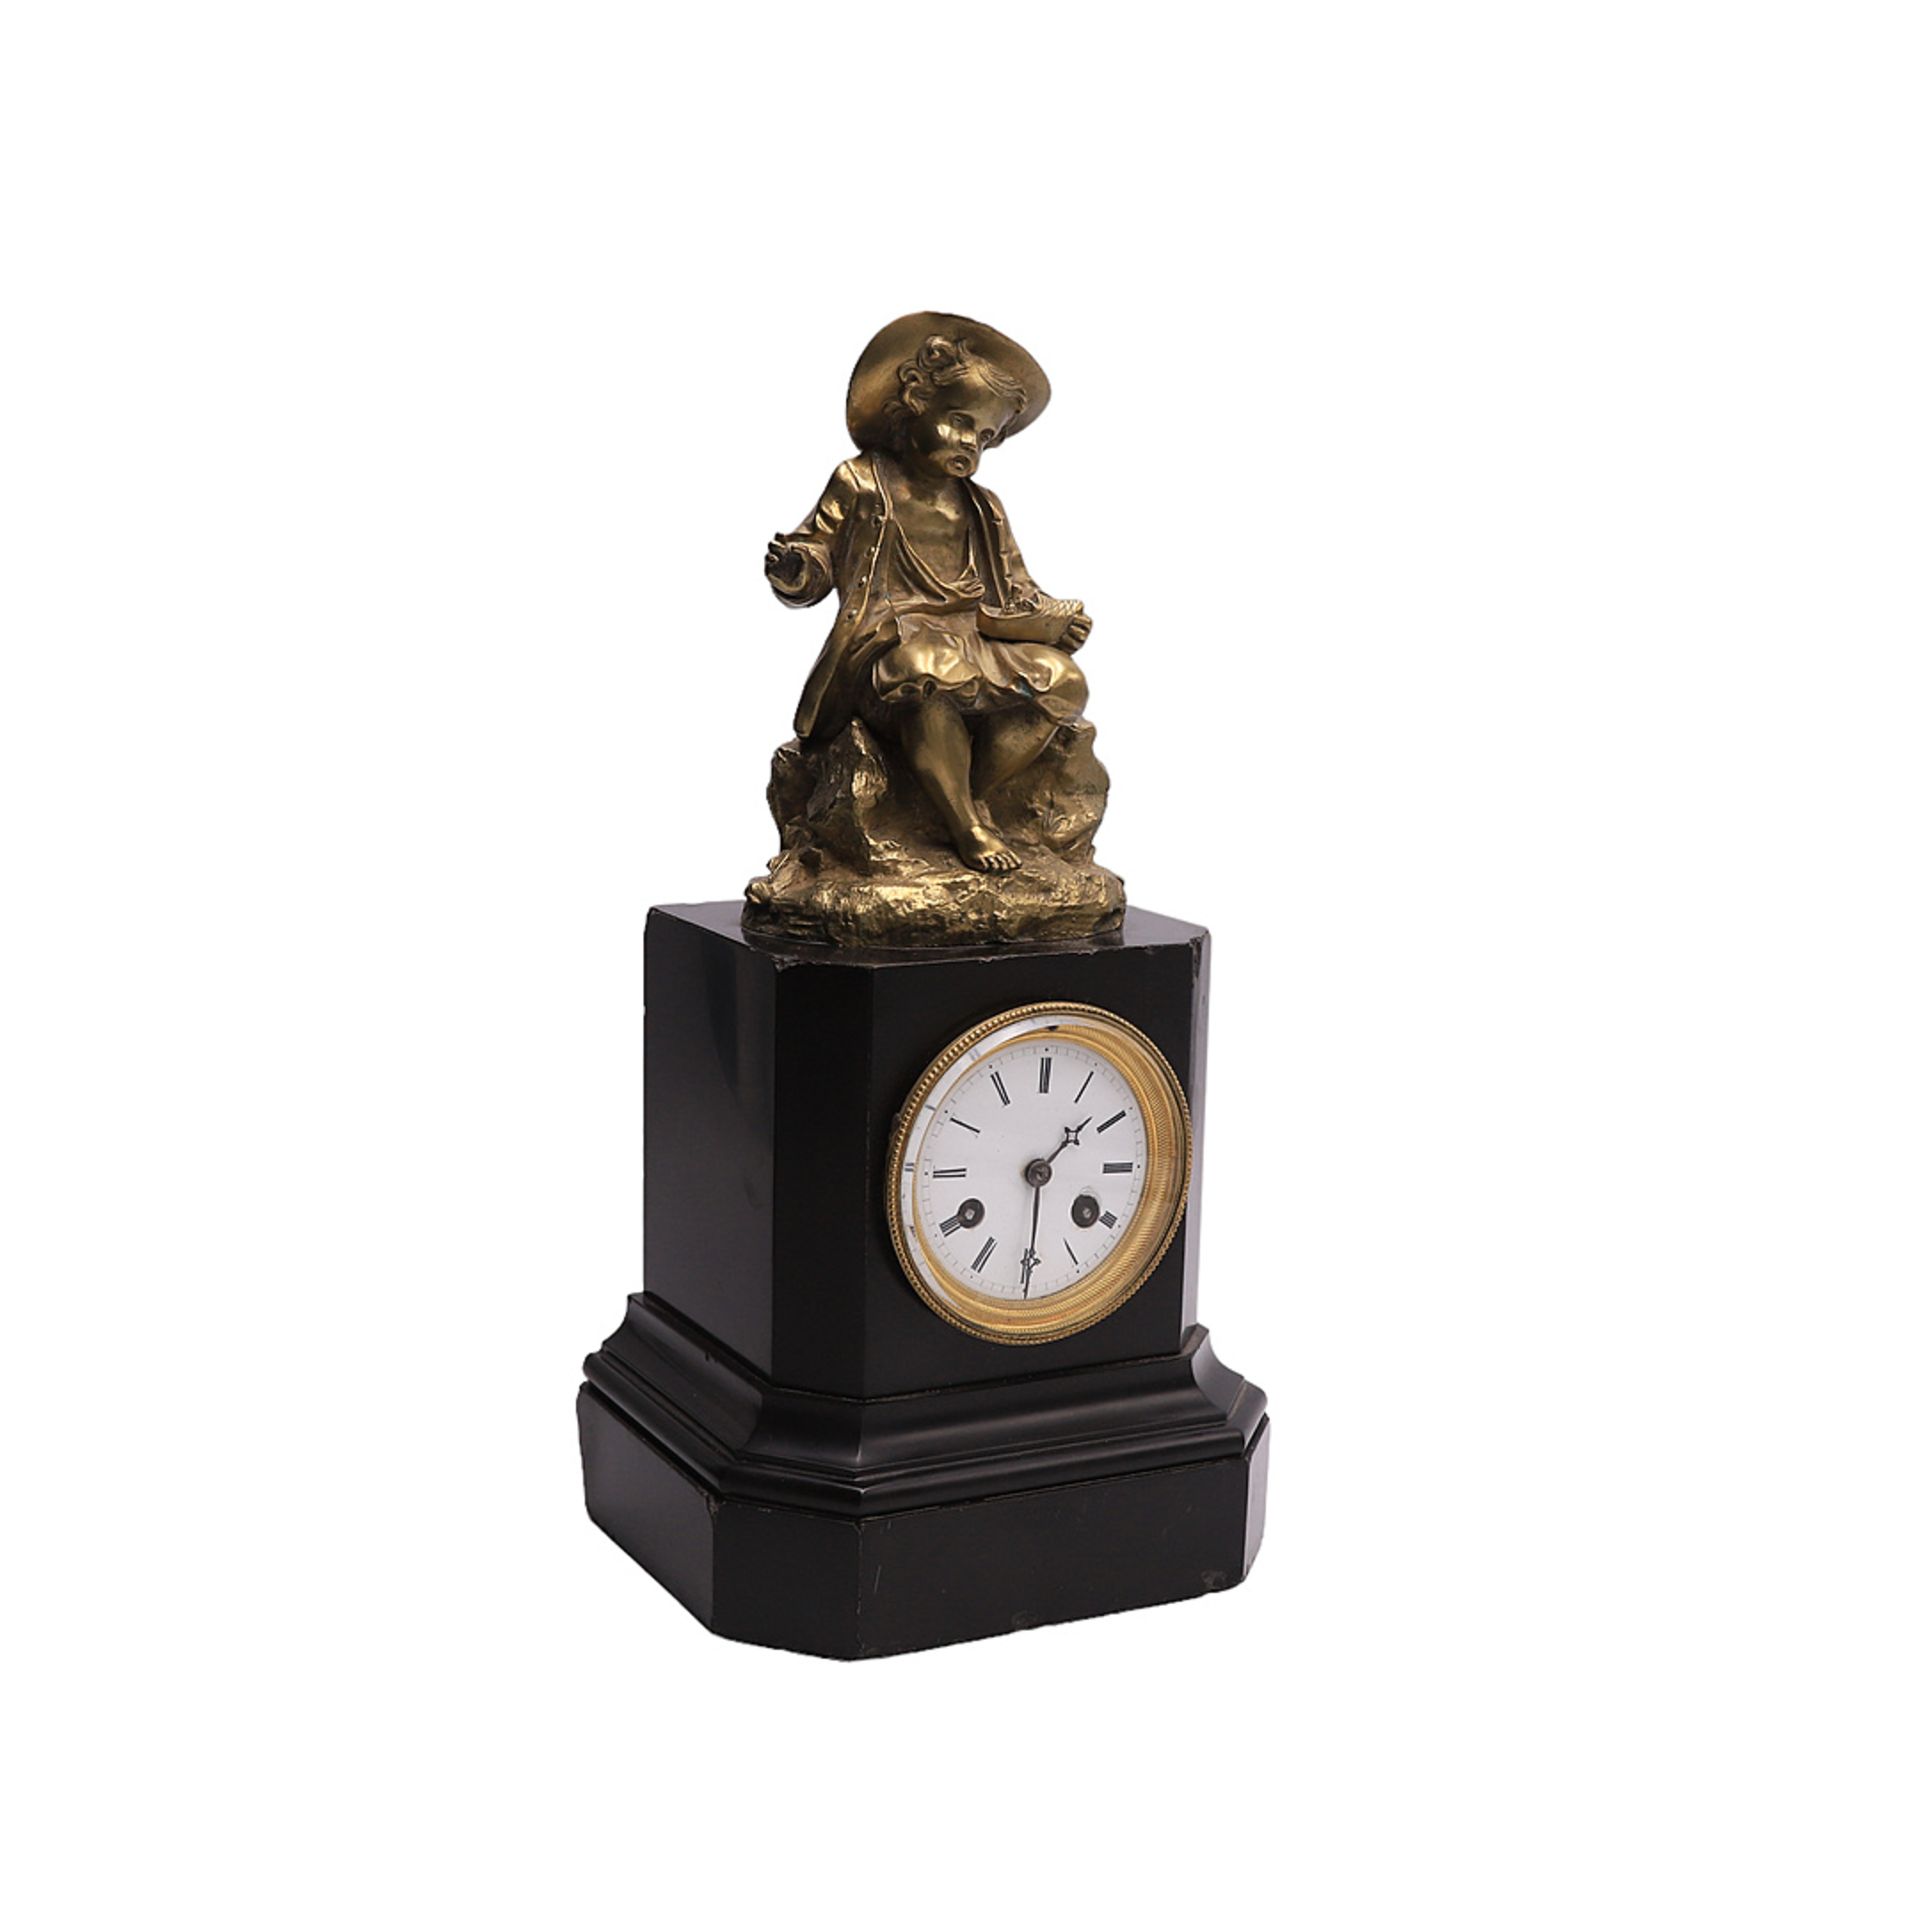 Mantelpiece clock with a boy, German workshop, 19th century - Image 3 of 6